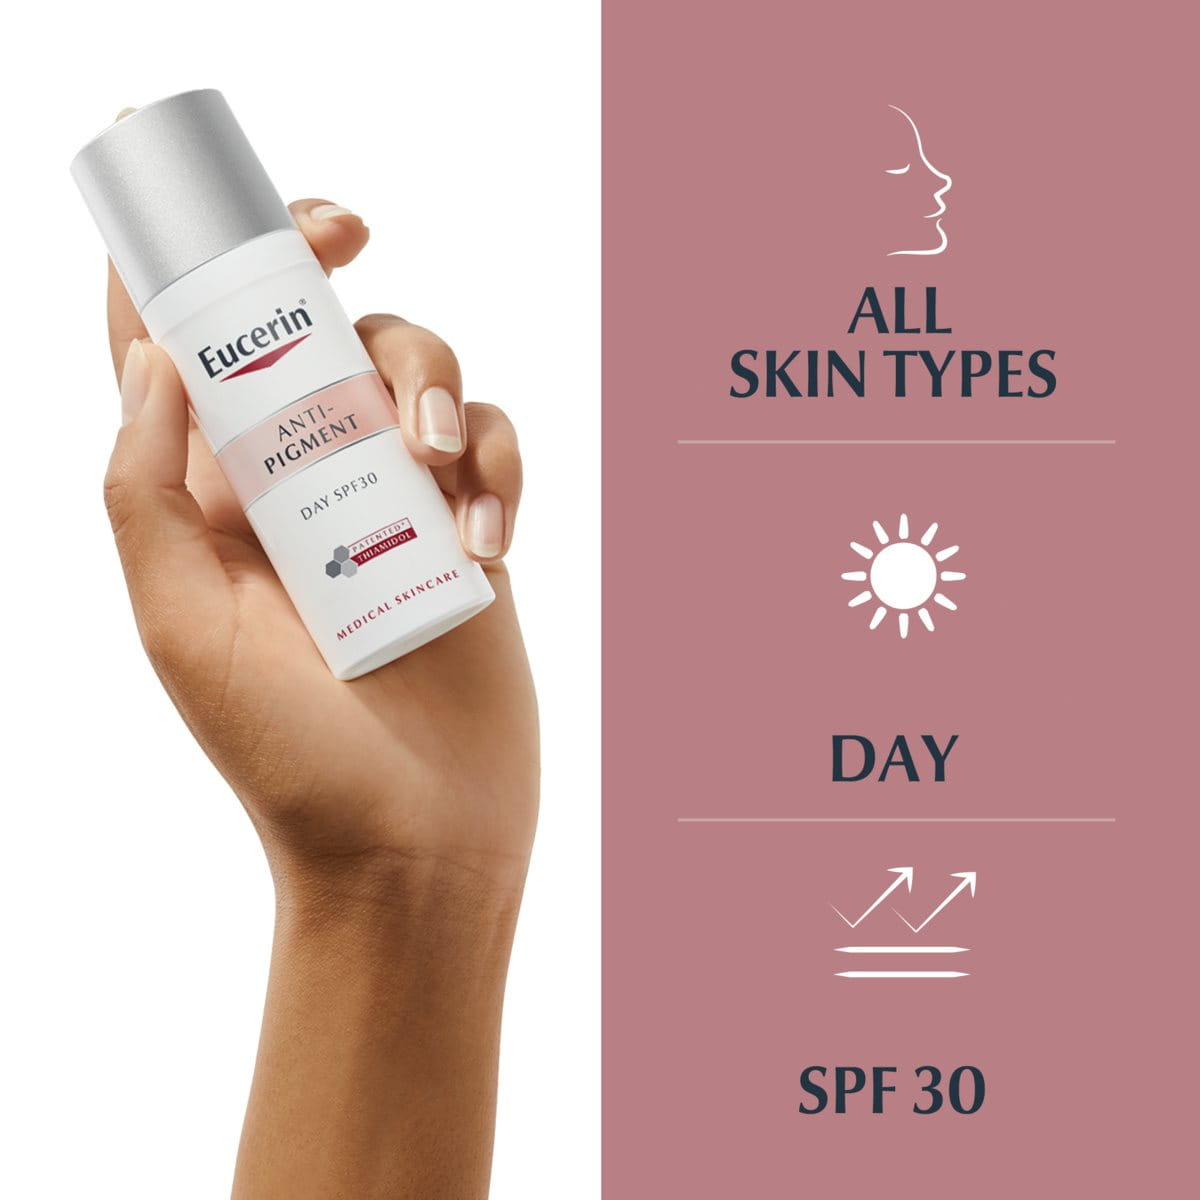 støvle arsenal Maiden Eucerin Anti-Pigment Day SPF 30 is a pigmentation cream for the face that  reduces dark spots and prevents their re-appearance for even, radiant skin.